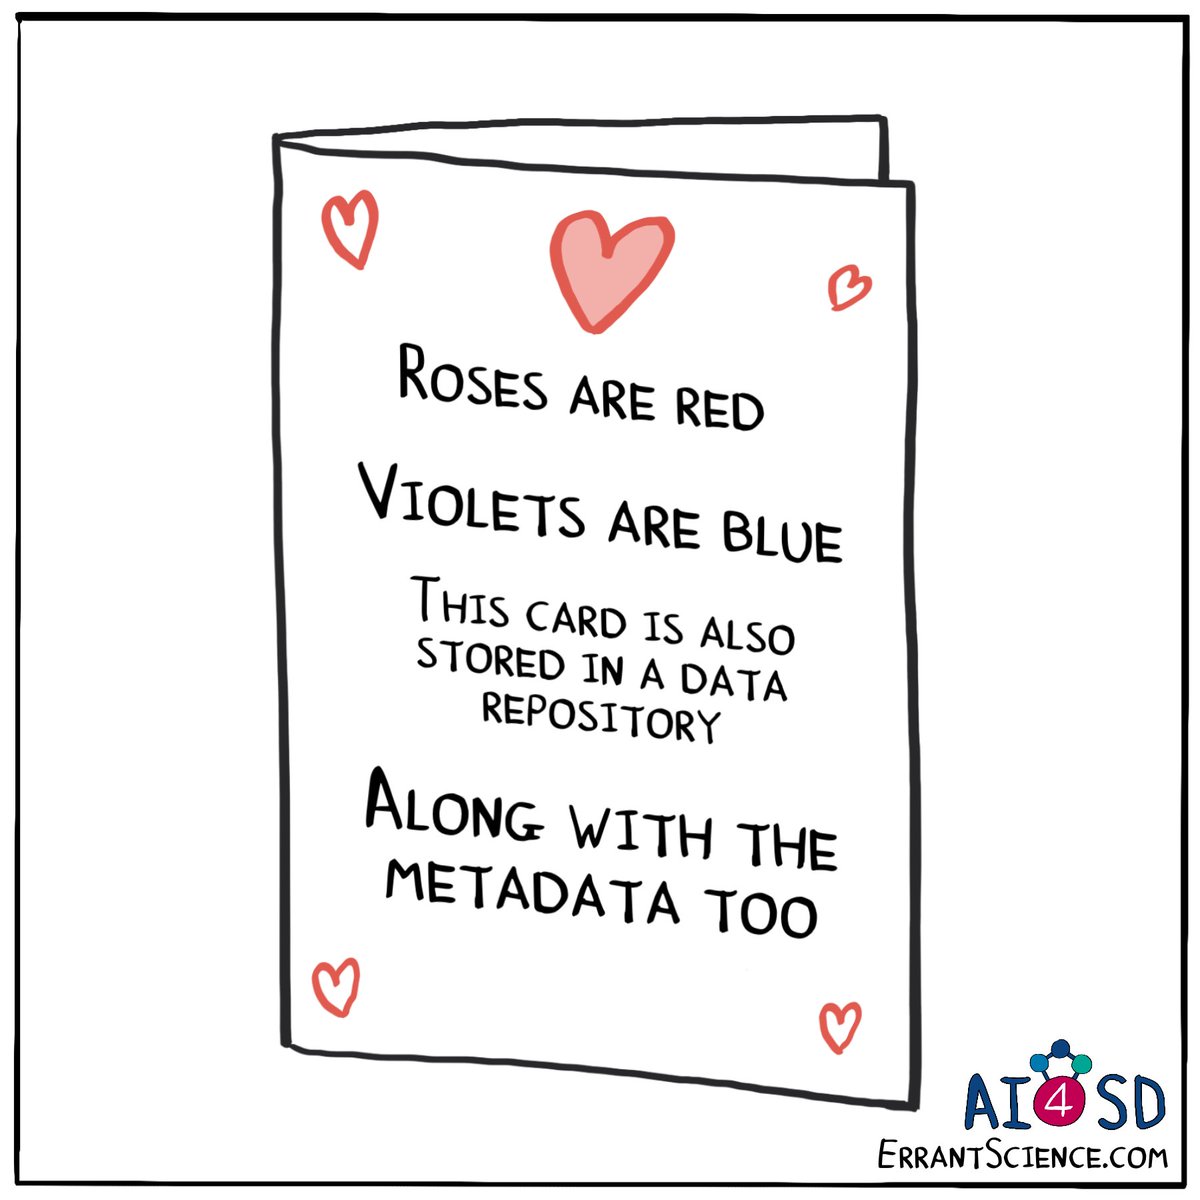 This valentines day and during #LoveData24 we thought this poem from @ErrantScience could do with a little love! 

Don't forget about your #metadata!